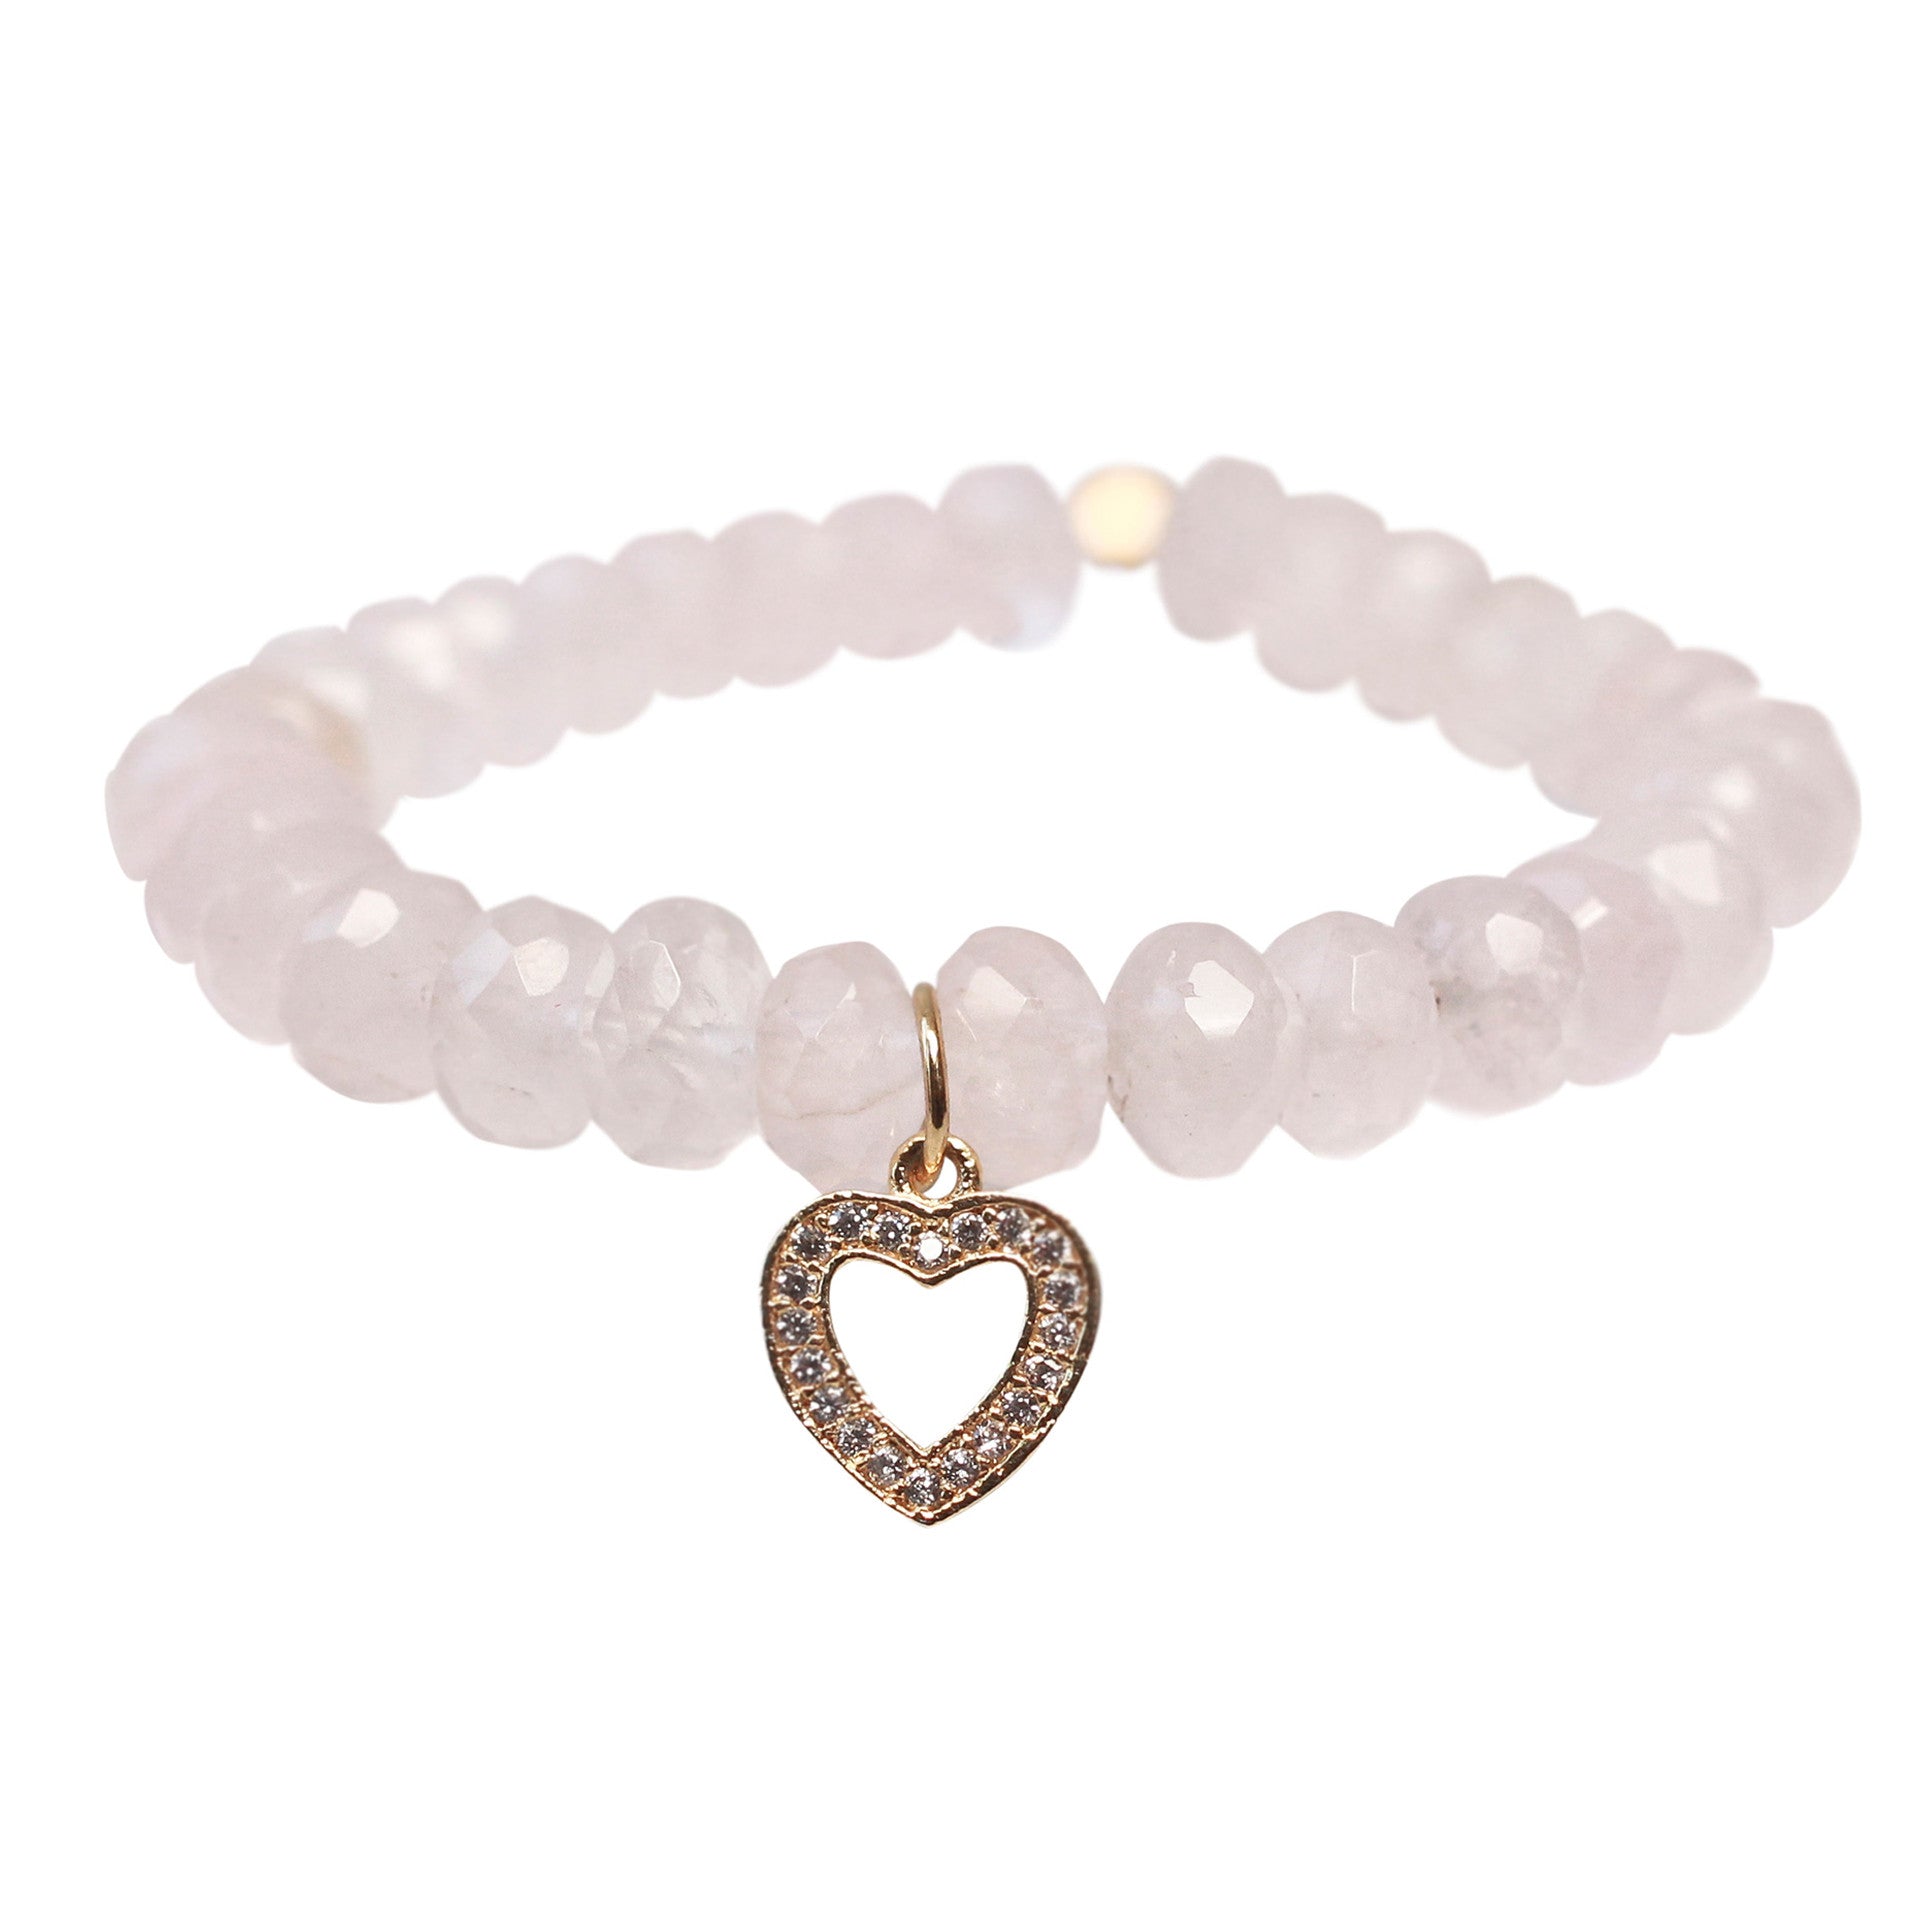 The Always in my Heart Charm in Gold